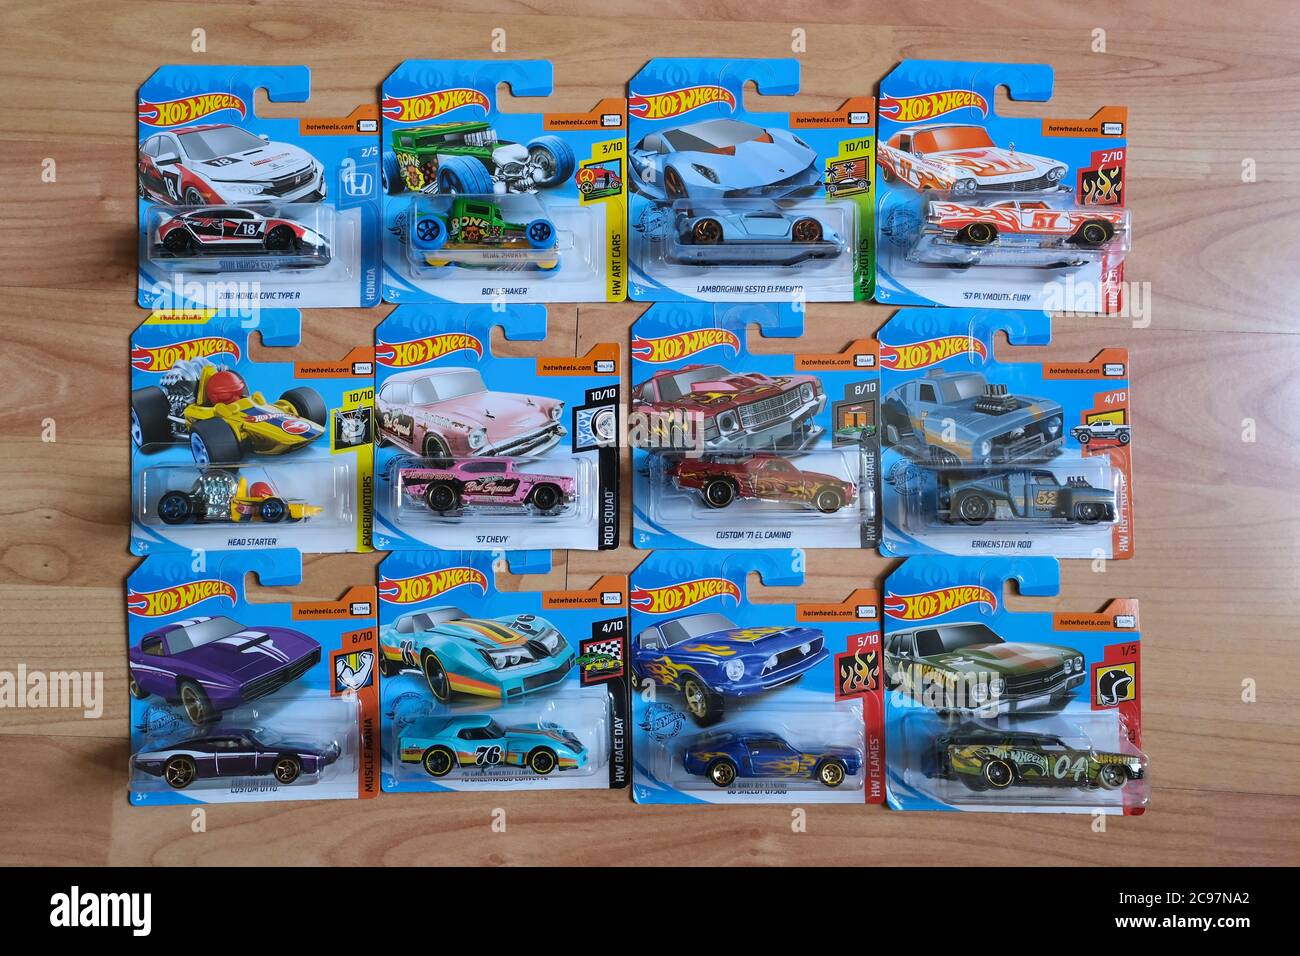 Istanbul, Turkey - July 29, 2020 : 12 Hot Wheels die cast toy cars in blisters on wooden floor from directly above view . Stock Photo